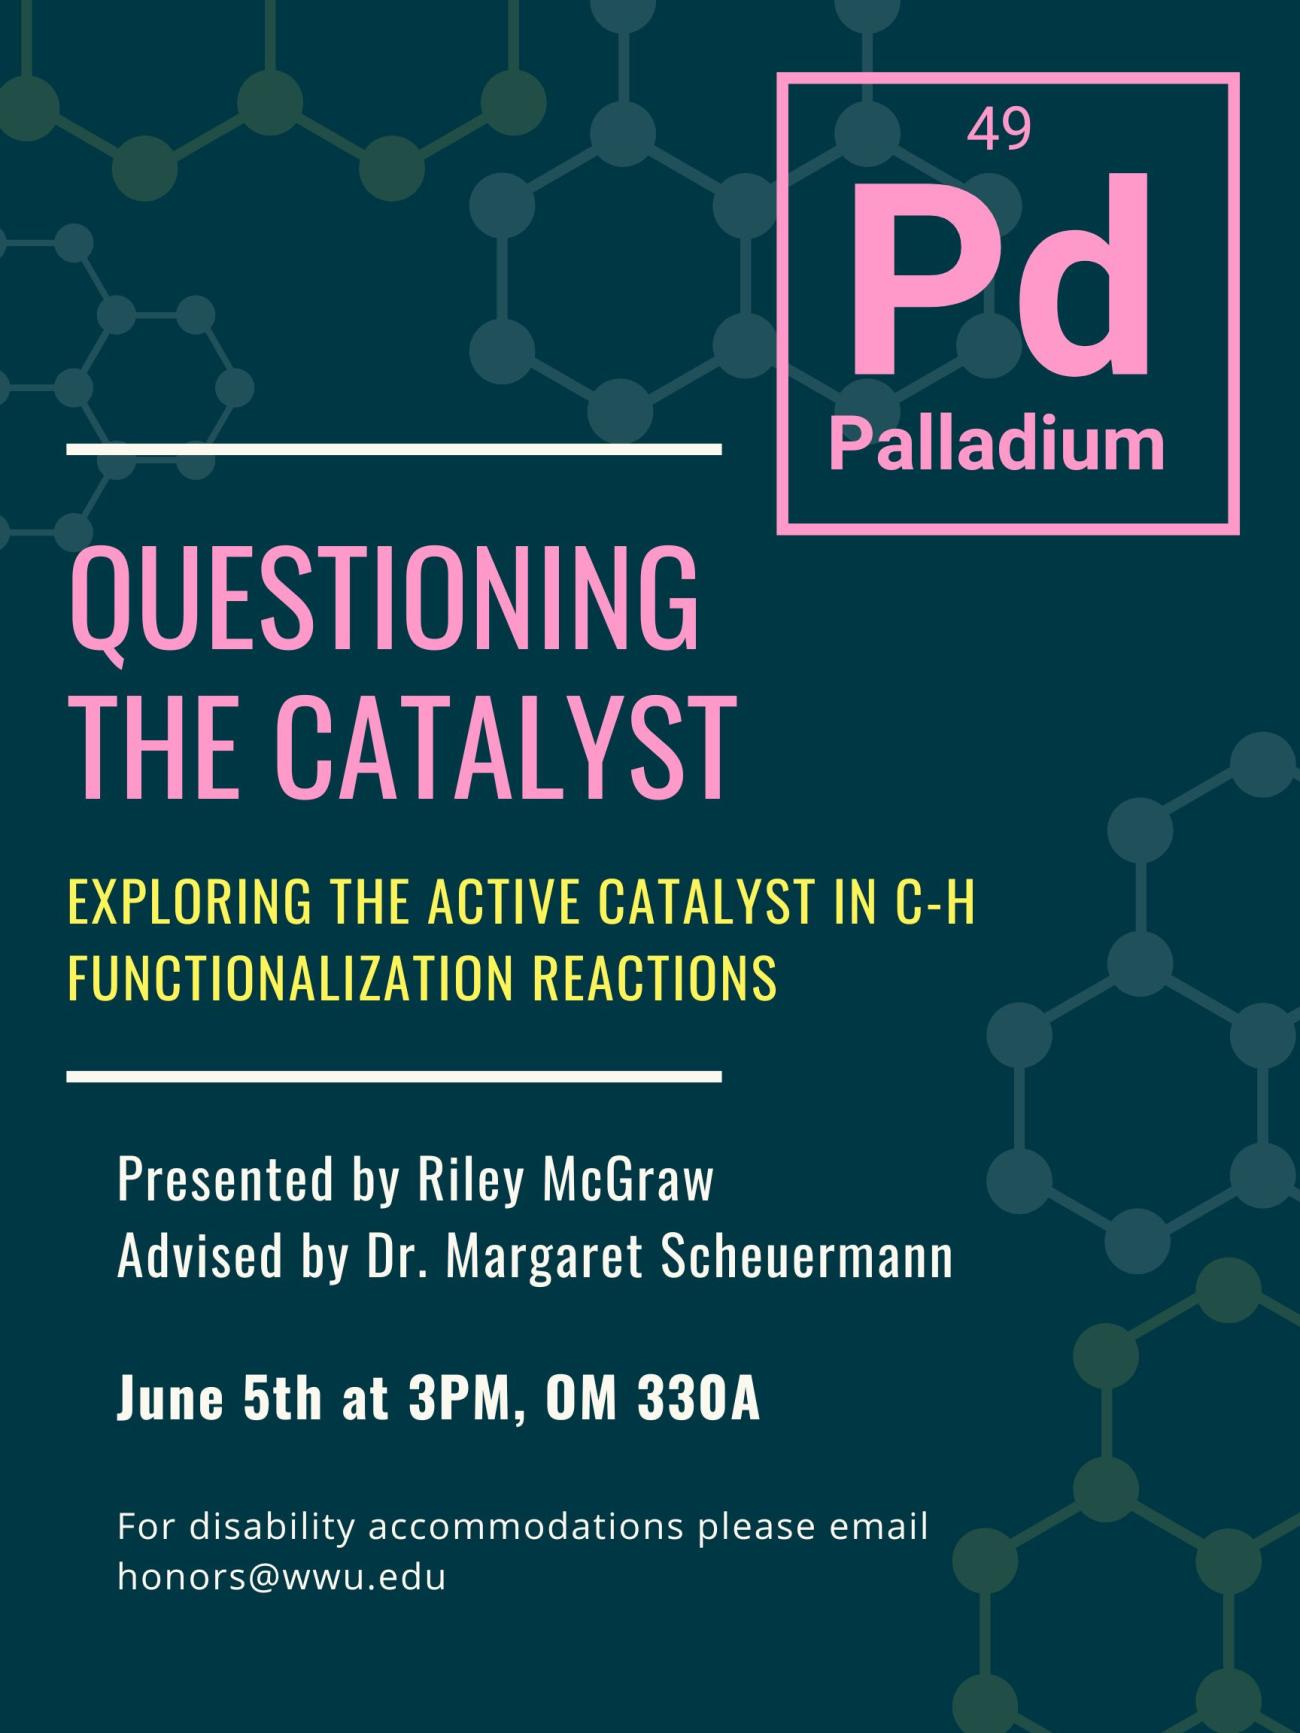 A poster with a dark green background and light green and blue molecules surrounding the border. In the top right hand corner is a pink elemental symbol of palladium. Text reads: "Questioning the Catalys: Exploring the active catalyst in C-H functionalization reactions. Presented by Riley McGraw, Advised by Dr. Margaret Scheuermann, June 5th at 3pm, OM 330A. For disability accommodations please email honors@wwu.edu."